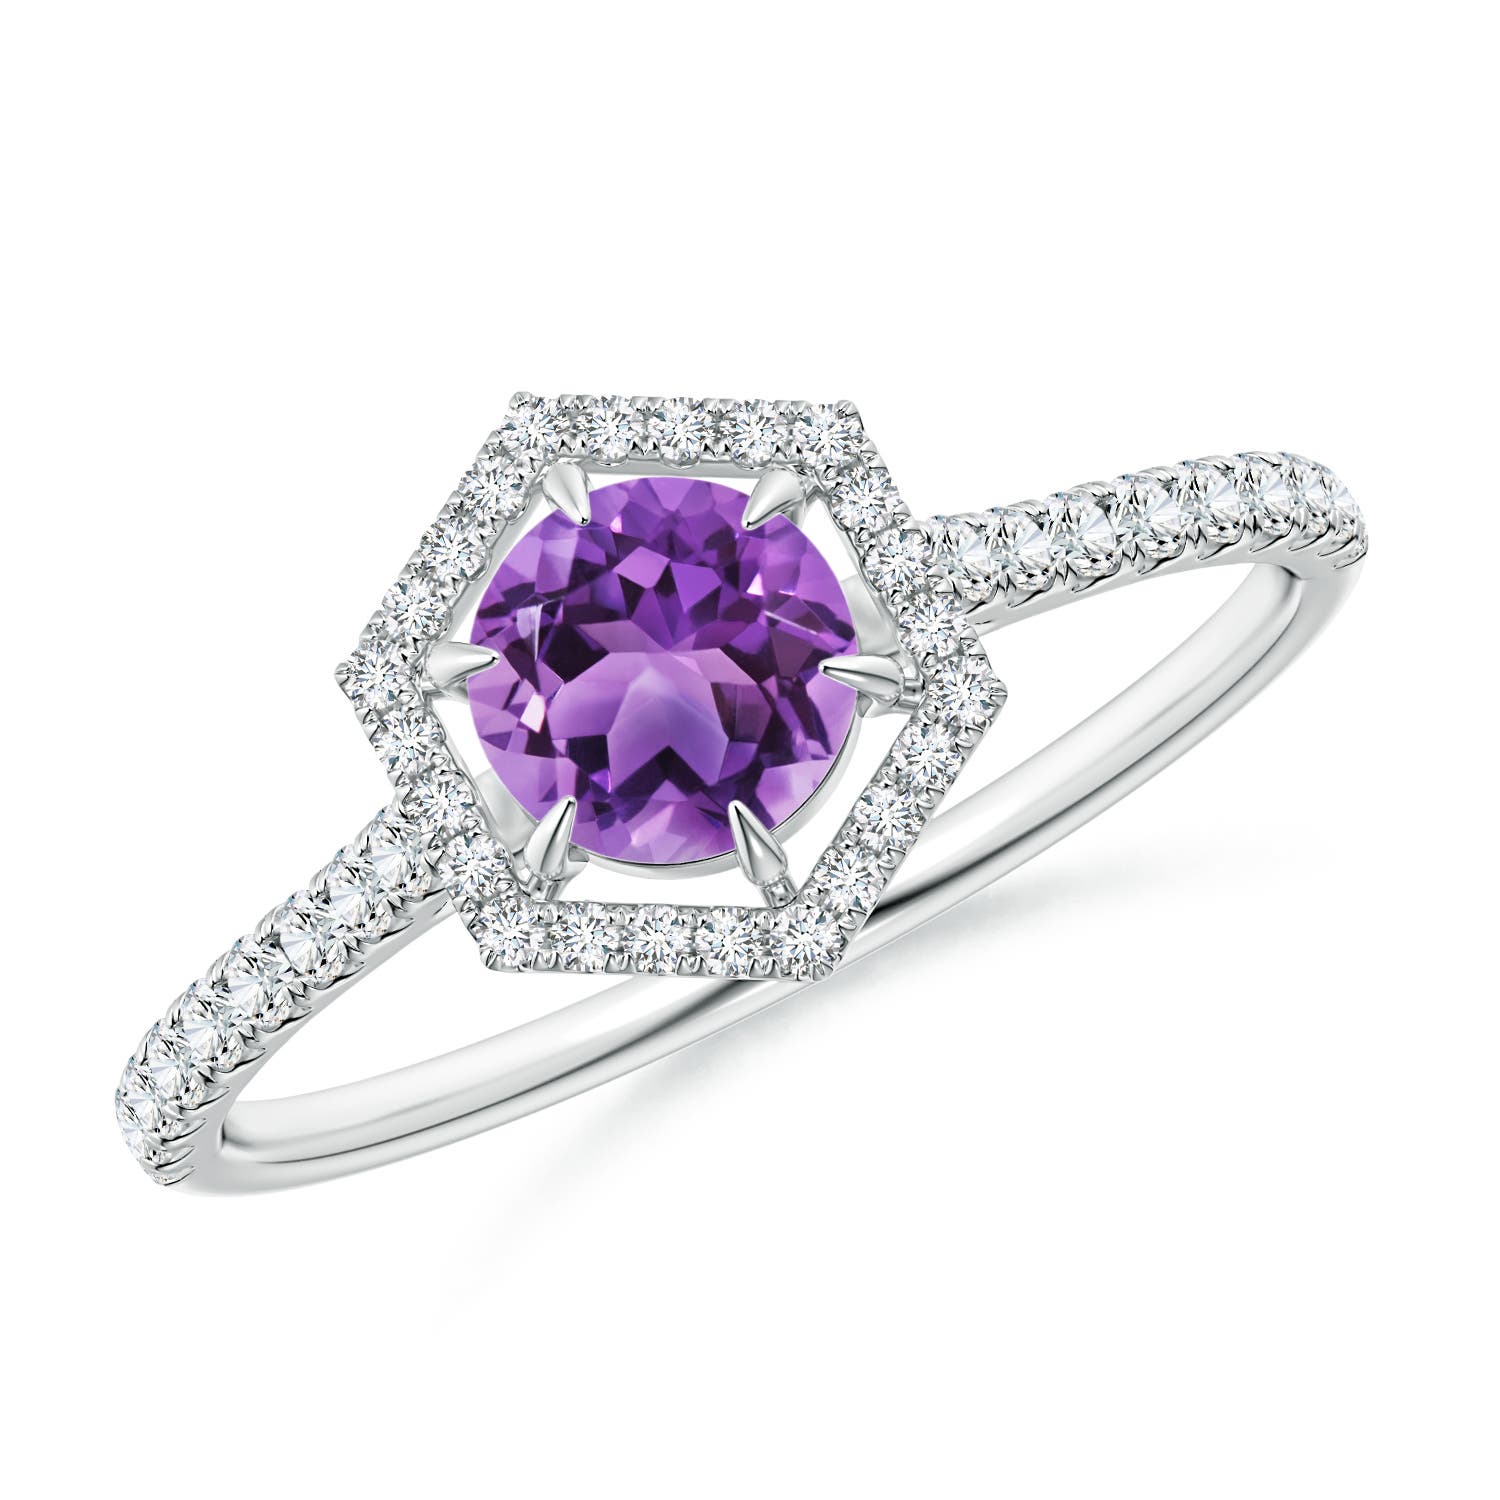 AA - Amethyst / 0.71 CT / 14 KT White Gold